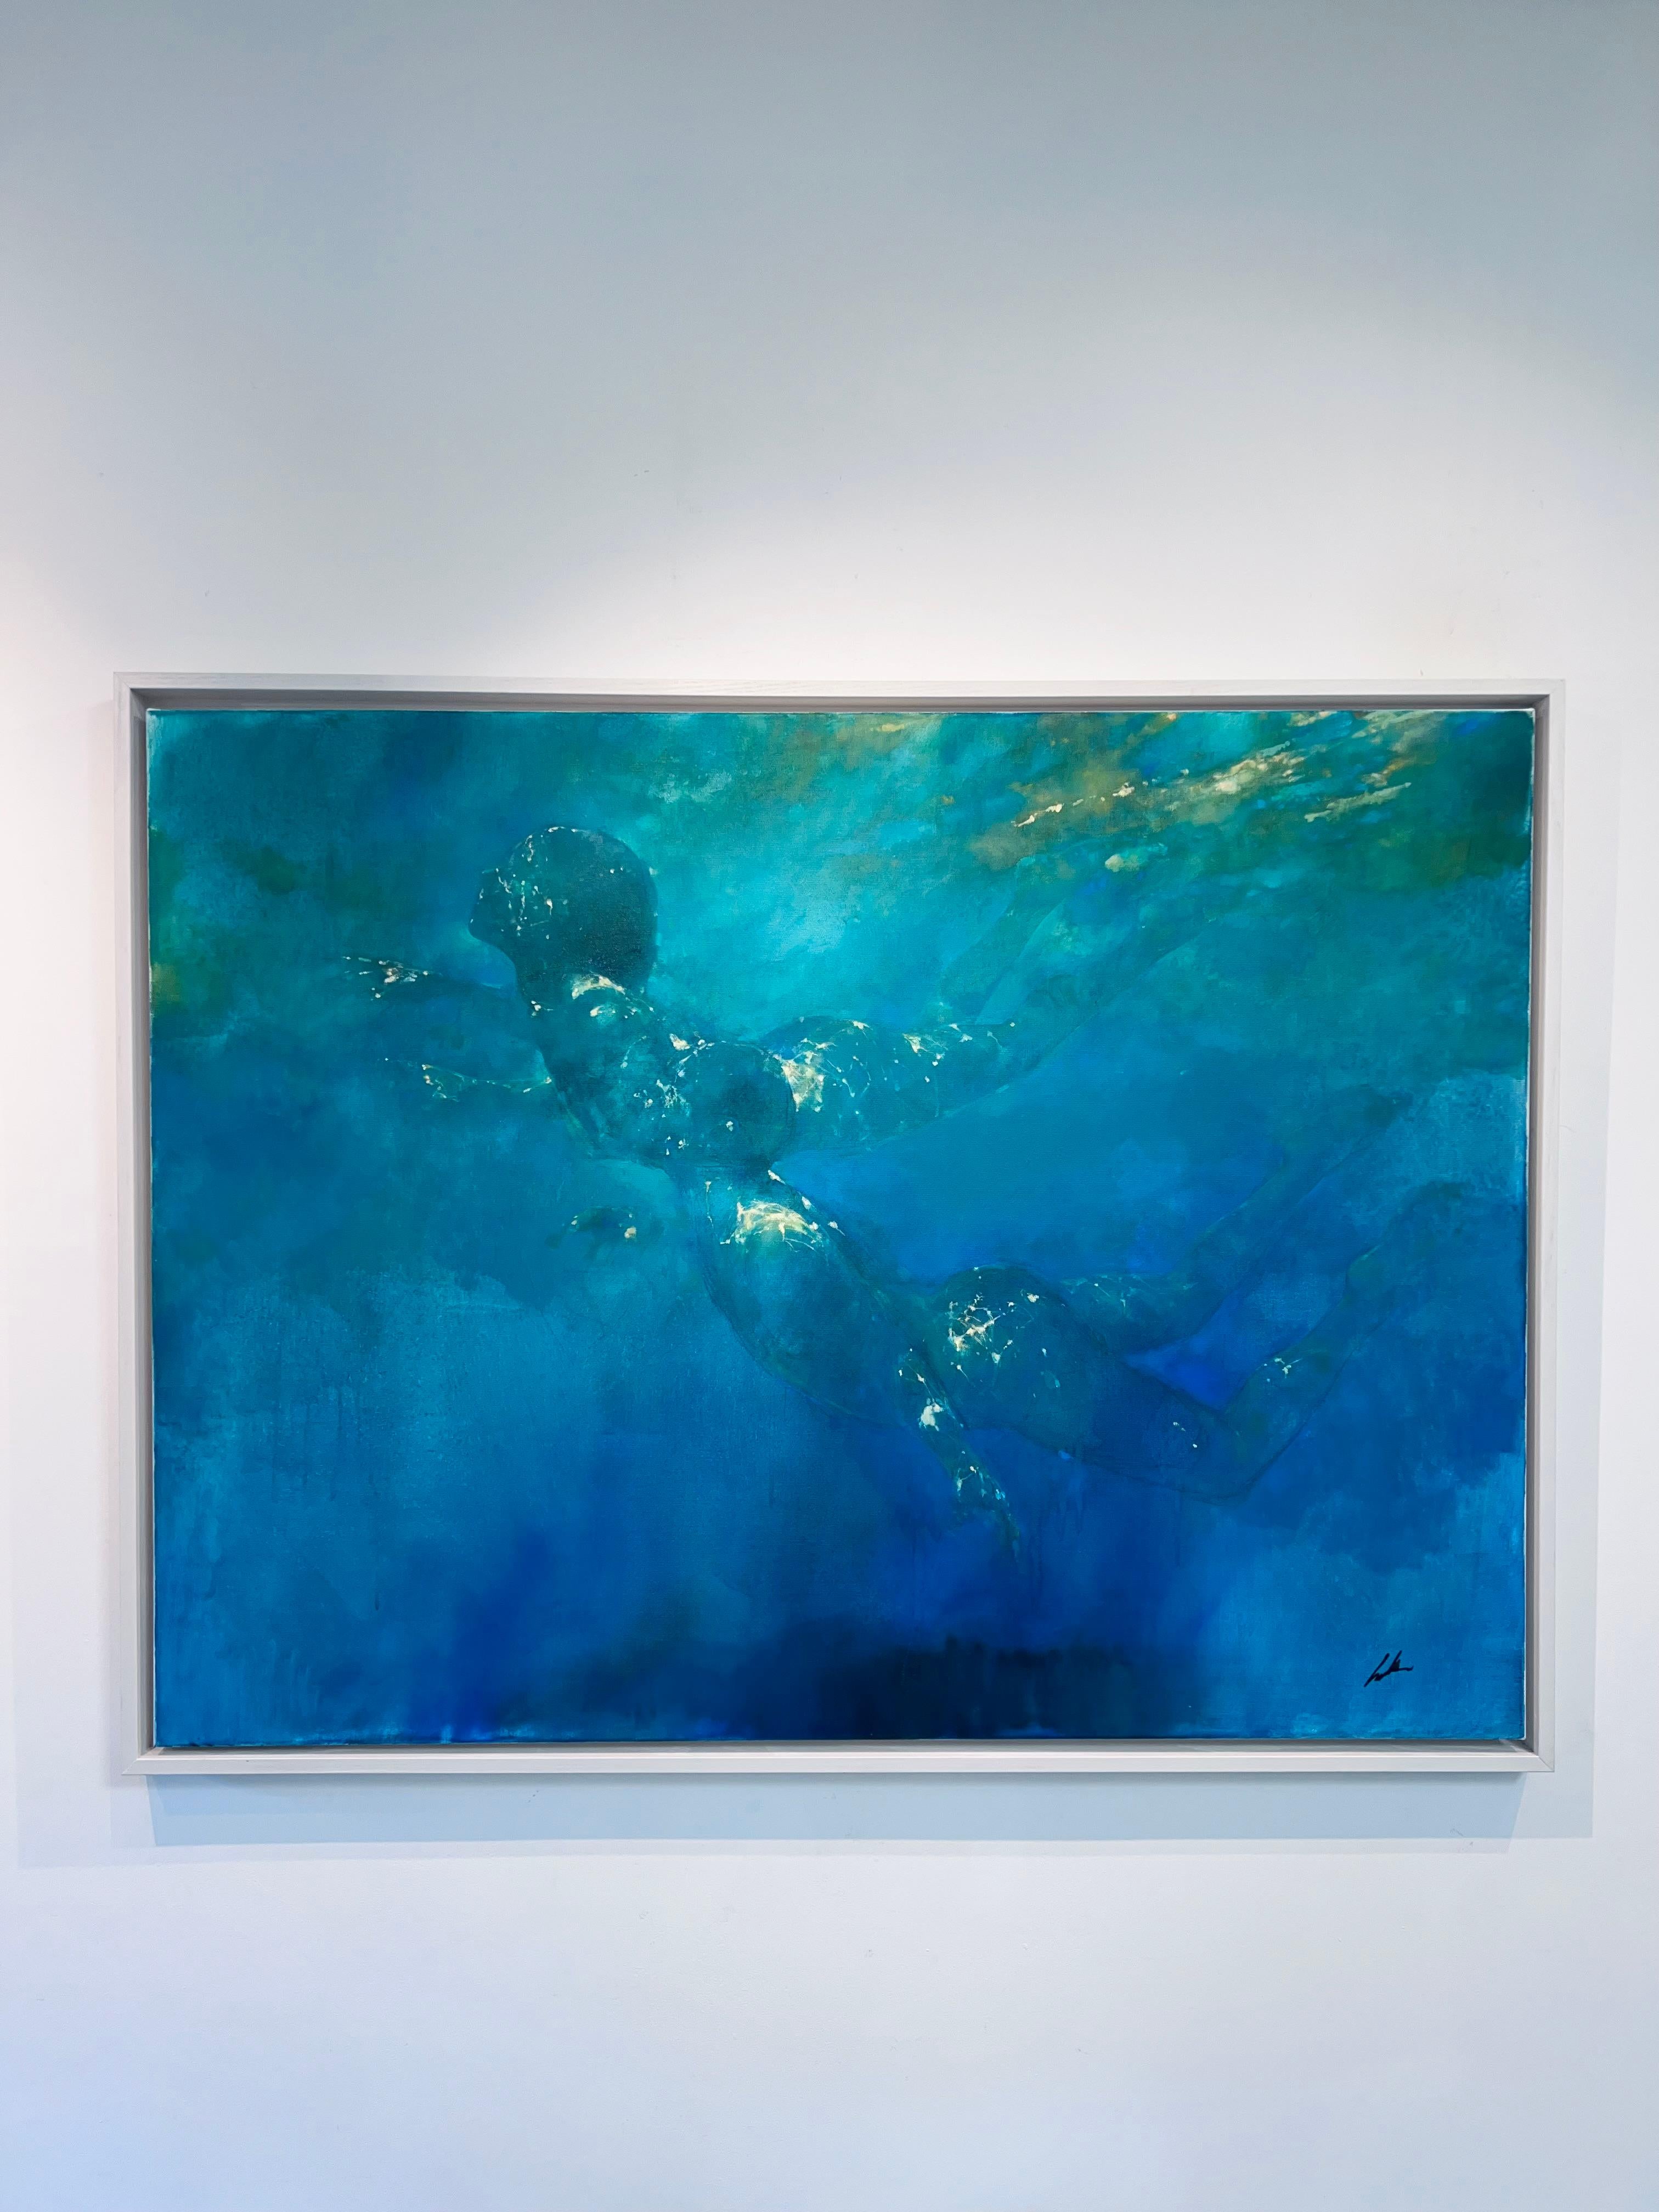 Emerald World - modern art, abstract human figurative expression painting - Painting by Bill Bate